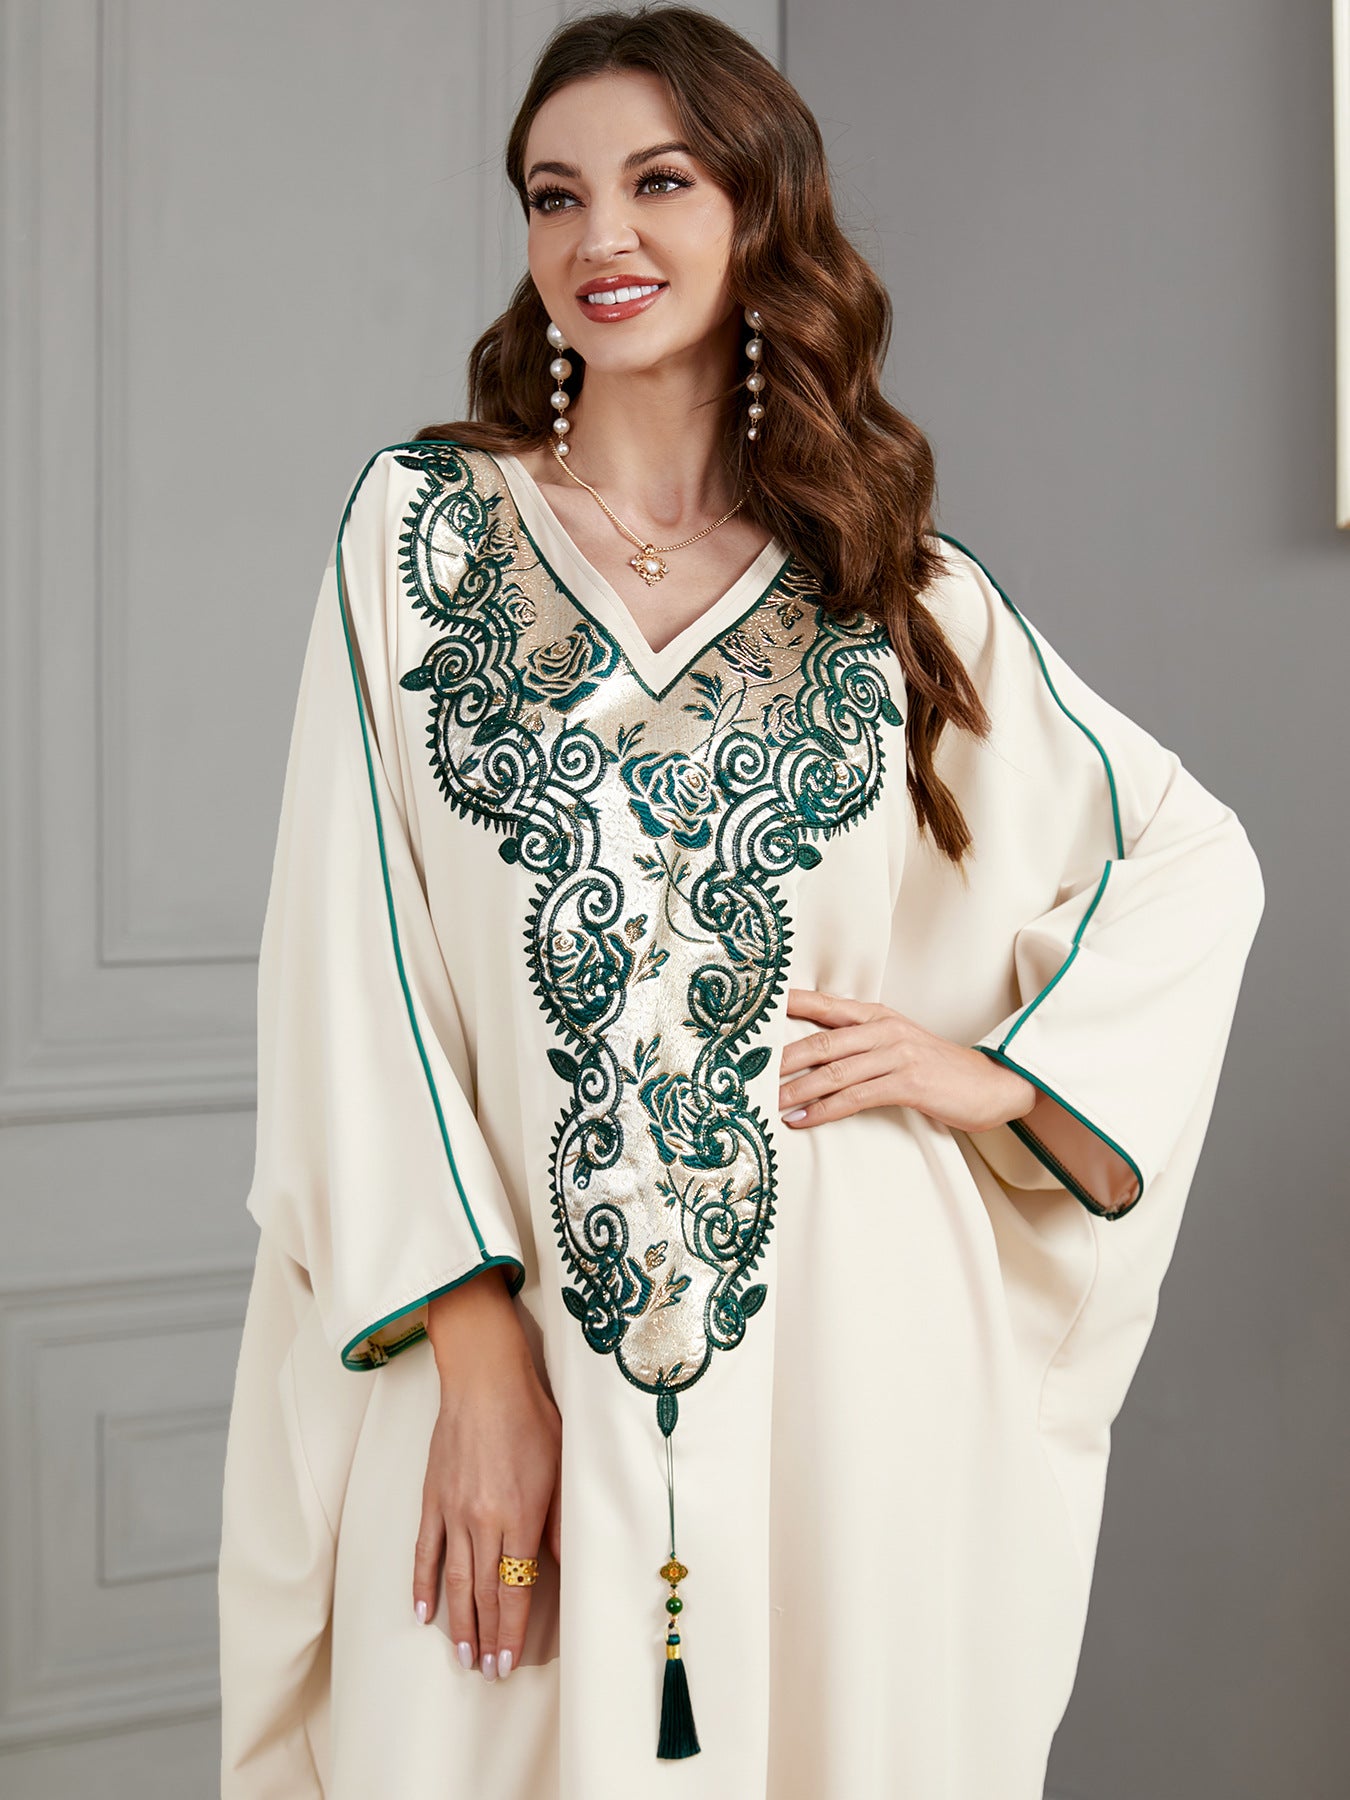 Embroidered Batwing Sleeve Casual White Dress